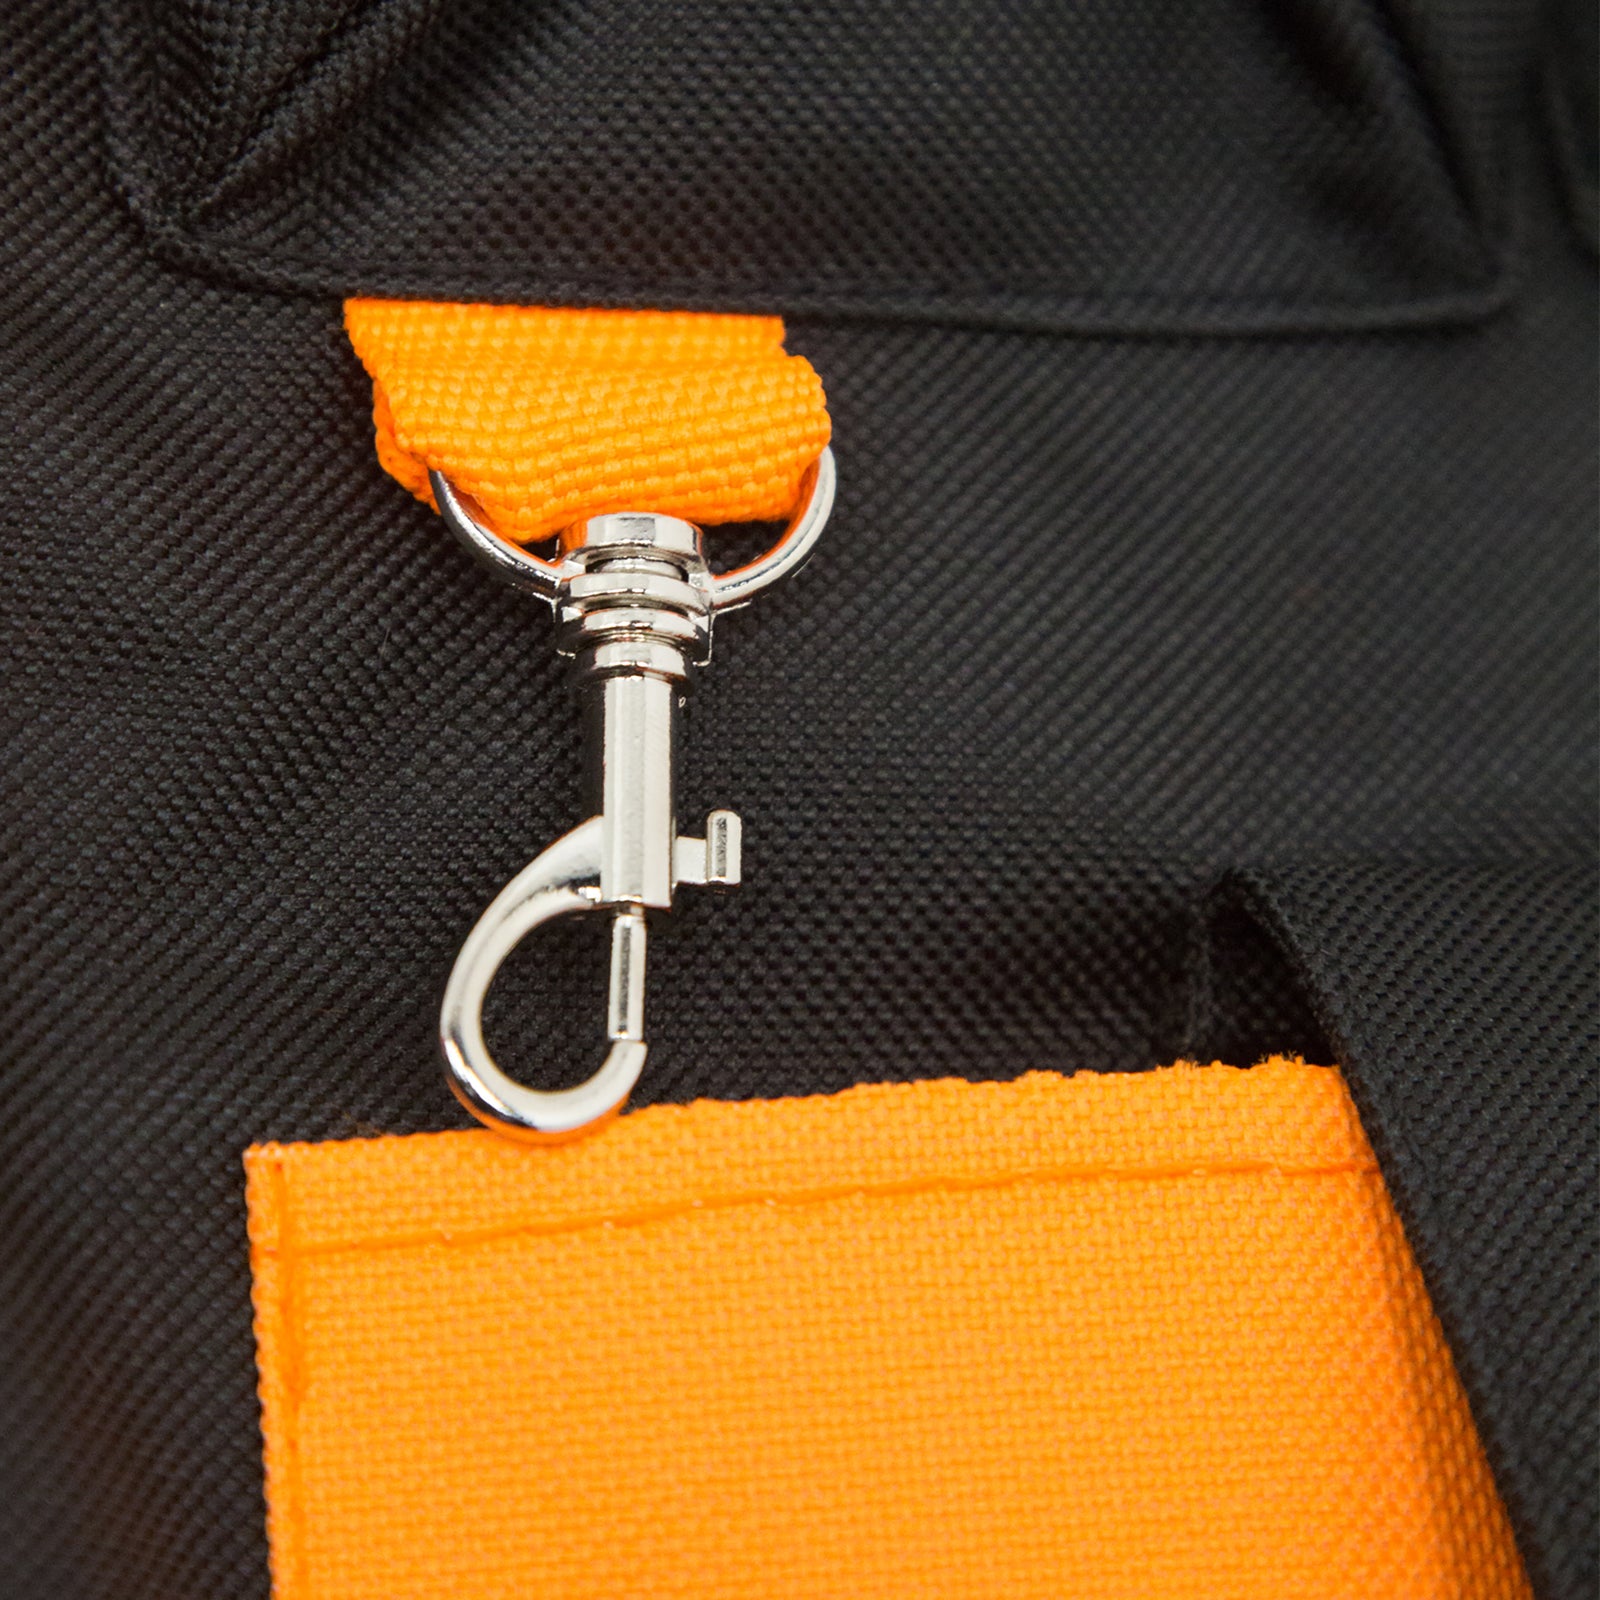 Close up shows a small metal carabiner as part of the tool vest